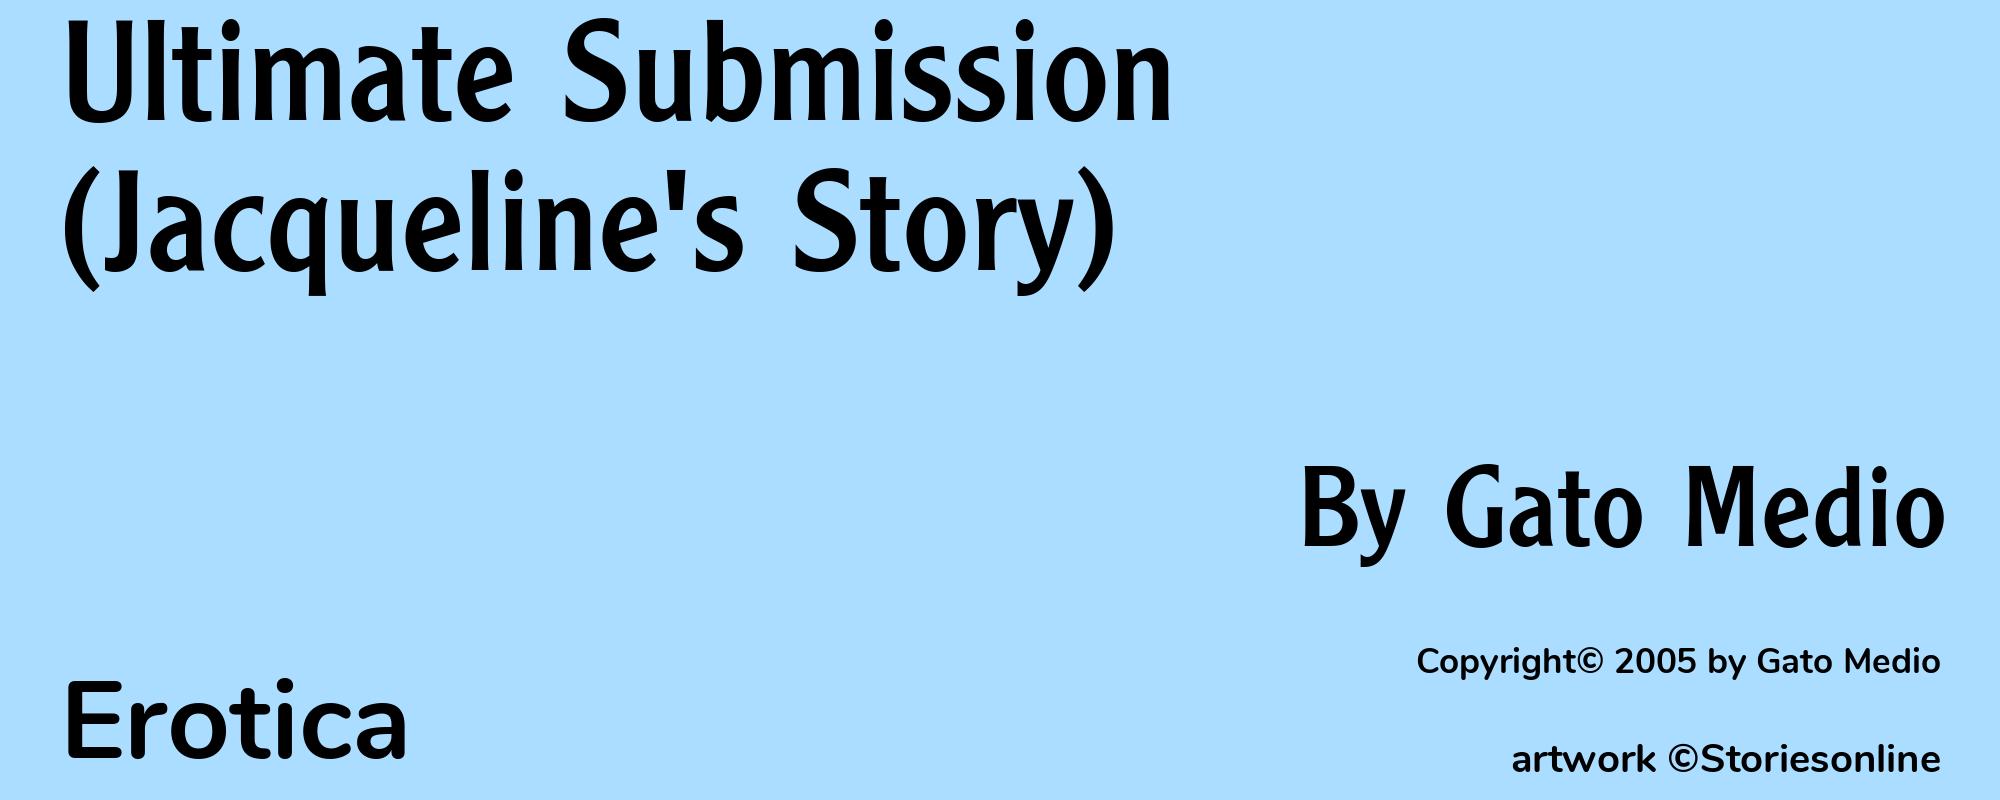 Ultimate Submission (Jacqueline's Story) - Cover